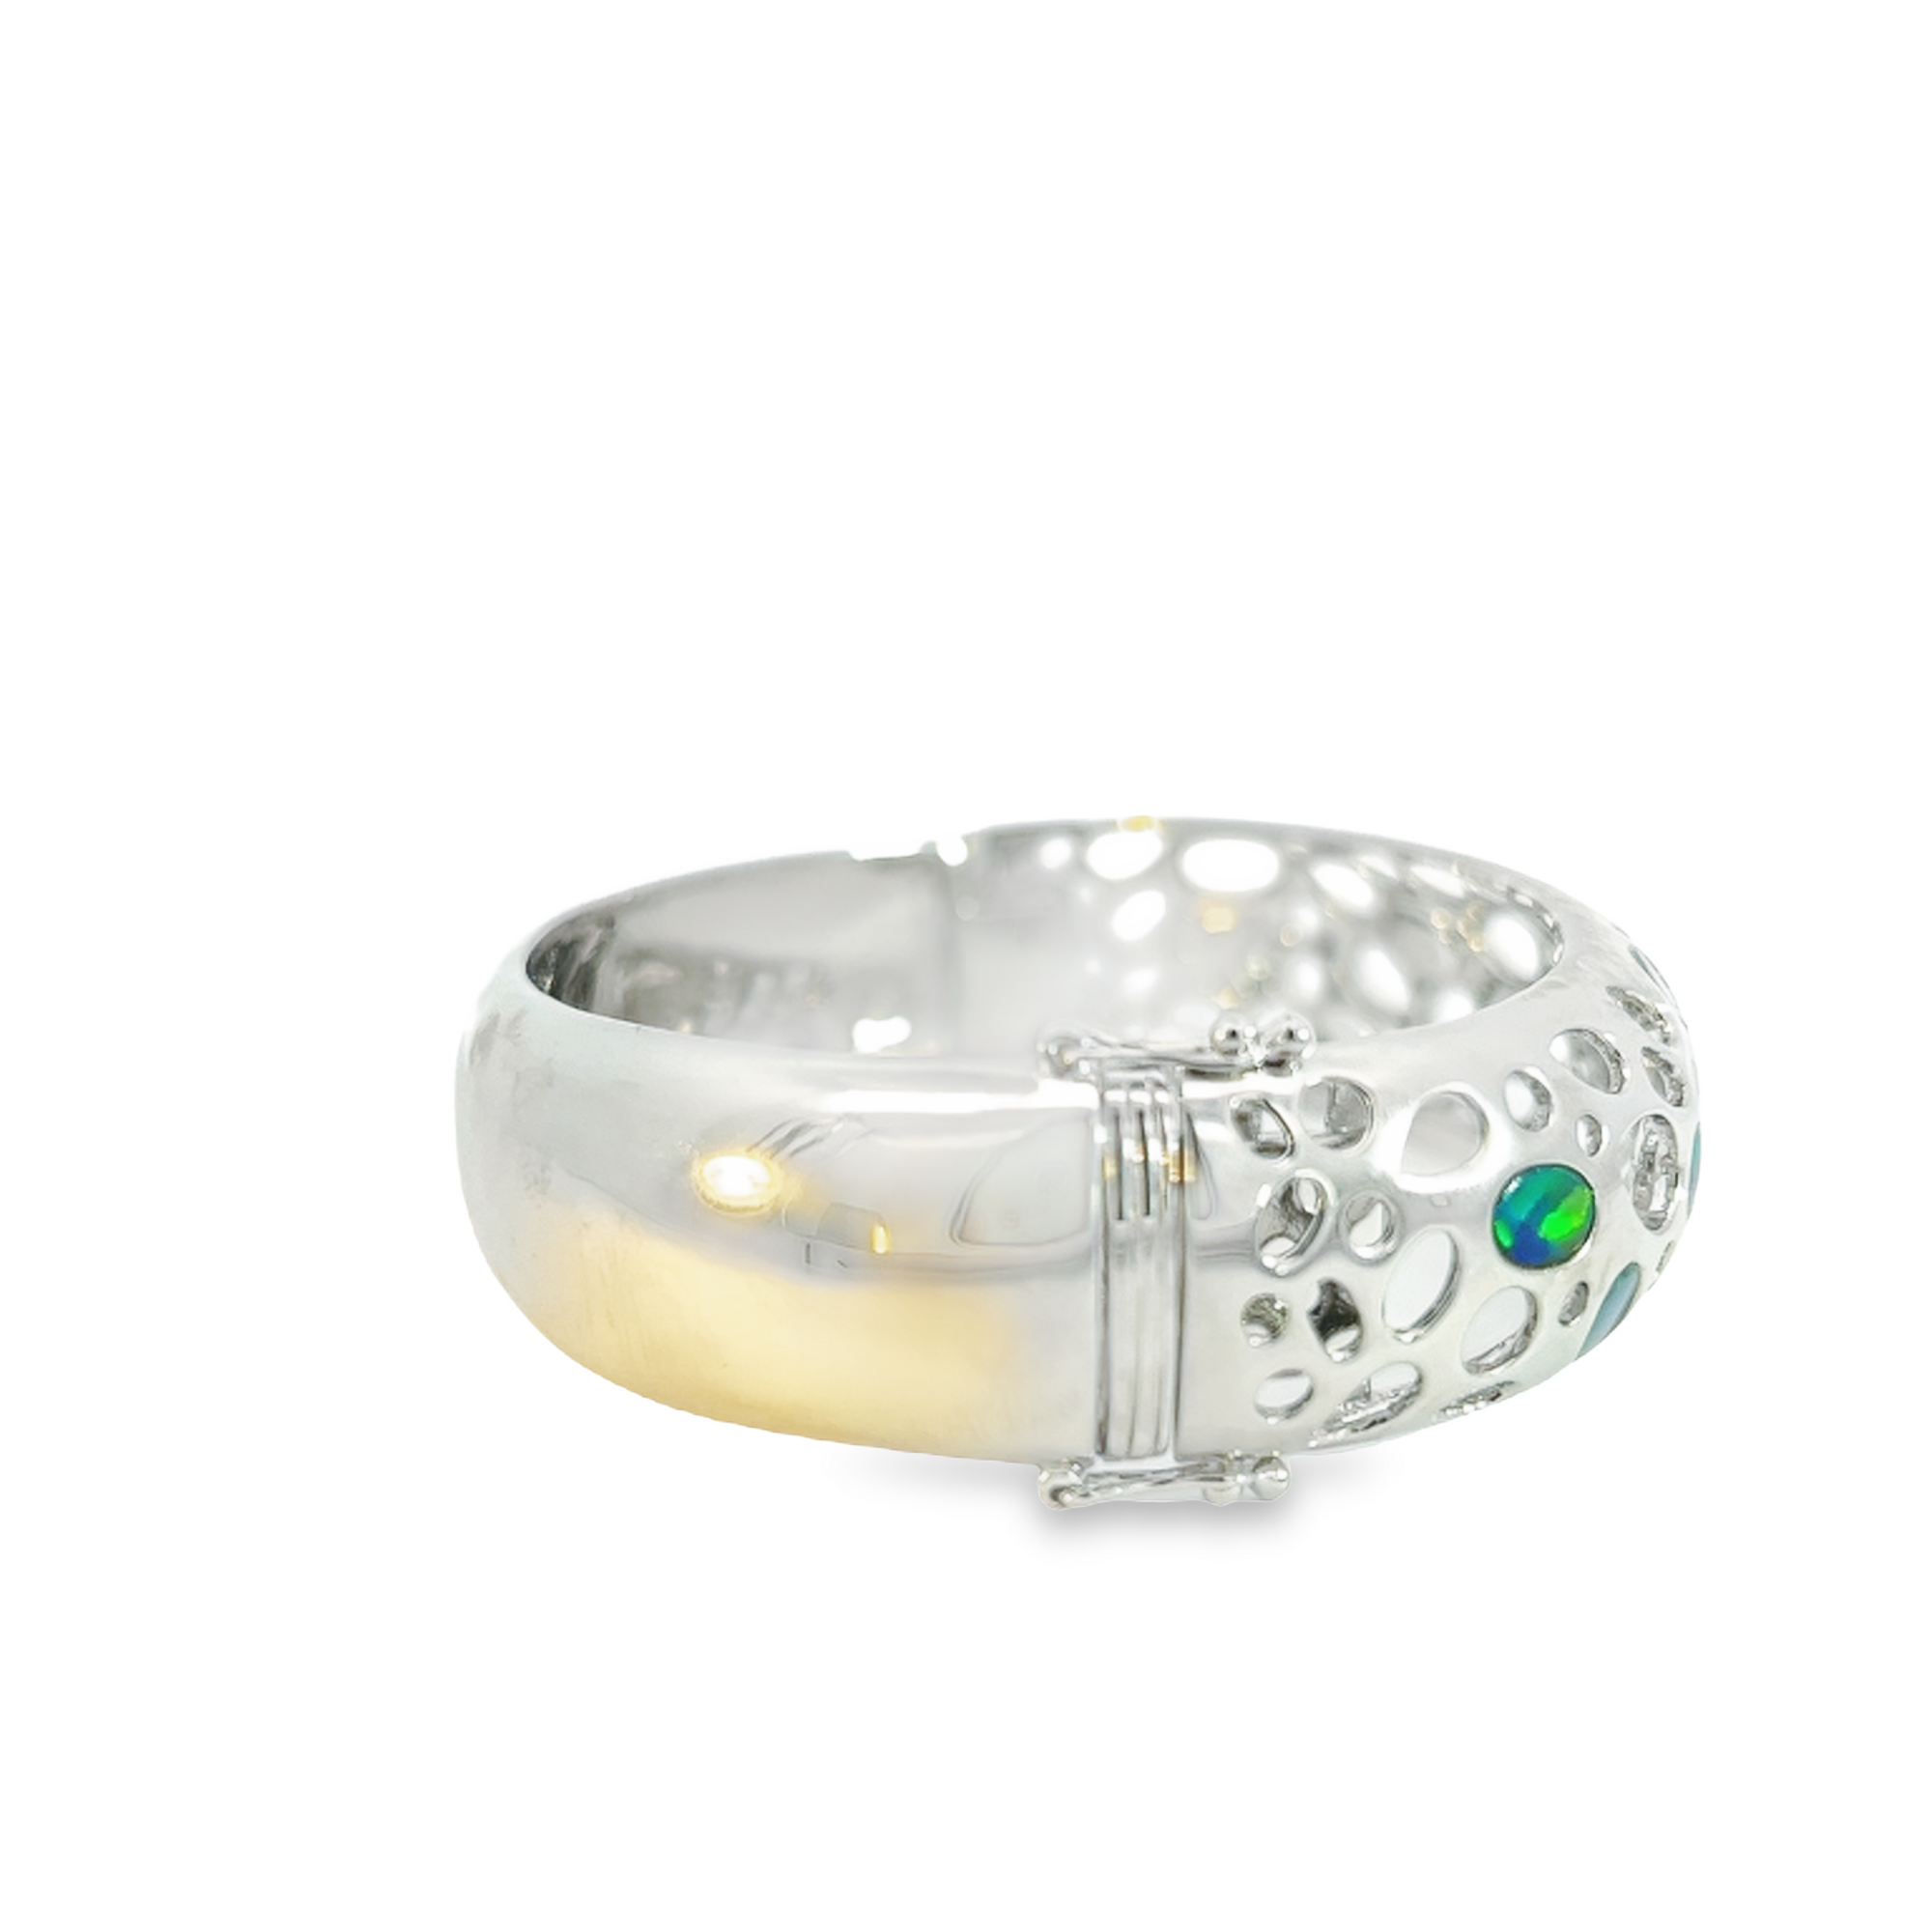 Sterling Silver cut out bangle with Opal doublets 1.96ct - Masterpiece Jewellery Opal & Gems Sydney Australia | Online Shop